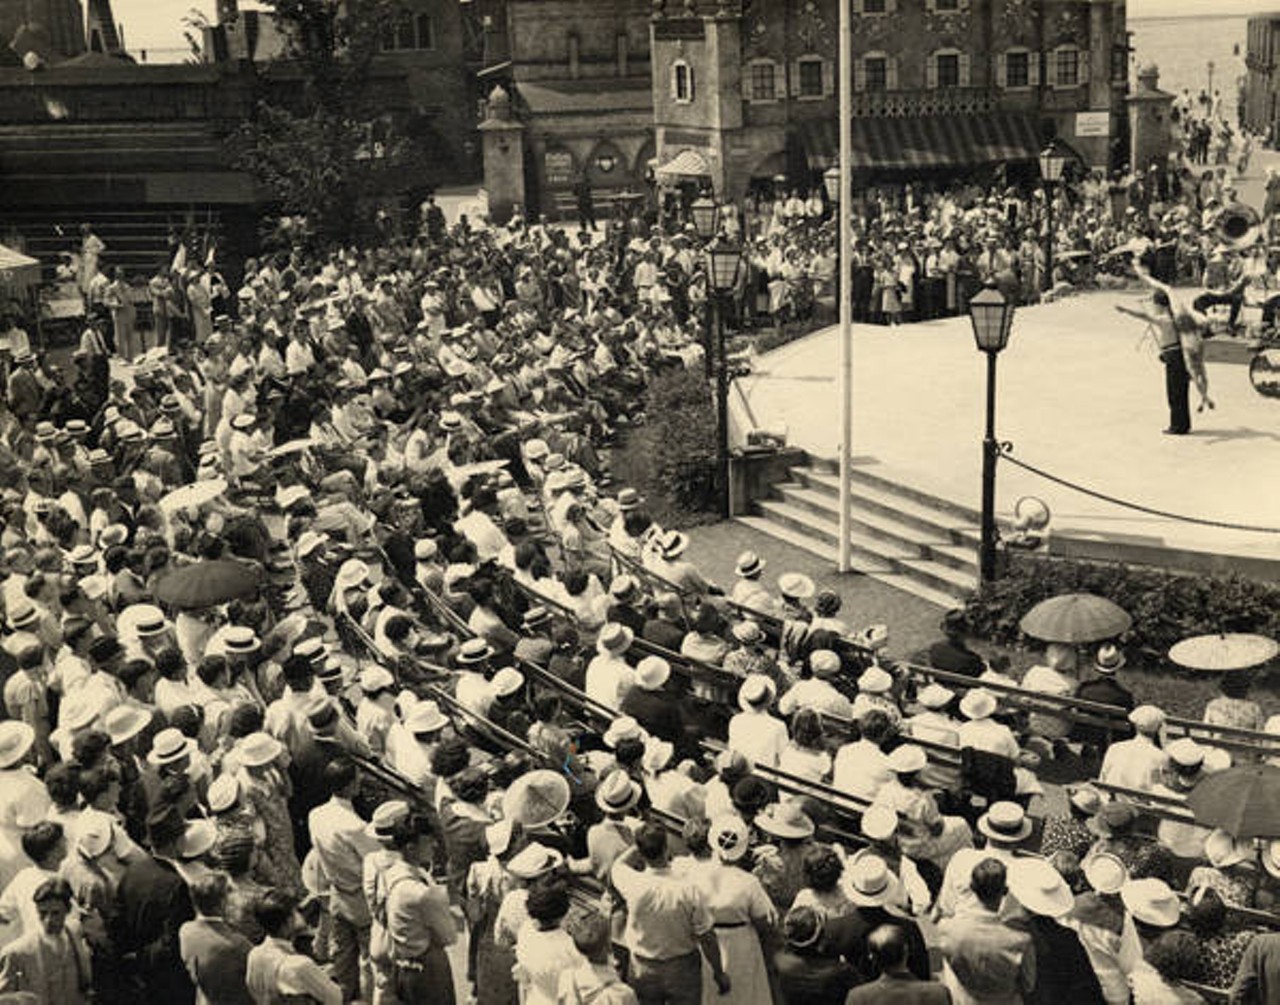 An audience watches a performance at Streets of the World. The Streets of the World attraction at the Great Lakes Exposition featured shopping, dining, and scenery representative of the following cultures: African, Armenian, Austrian, Belgian, Chinese, Croatian, Czech, Danish, Dutch, English, French, German, Greek, Hindu, Hungarian, Irish, Italian, Japanese, Jewish, Latvian, Lithuanian, Manx, Mexican, Norwegian, Polish, Rusin, Russian, Romanian, Scotch, Serbian, Slovak, Slovene, Spanish, Swedish, Swiss, Syrian, Ukrainian and Welsh. Streets of the World paid tribute to Cleveland's immigrant heritage and enabled visitors to experience a variety of cultures.